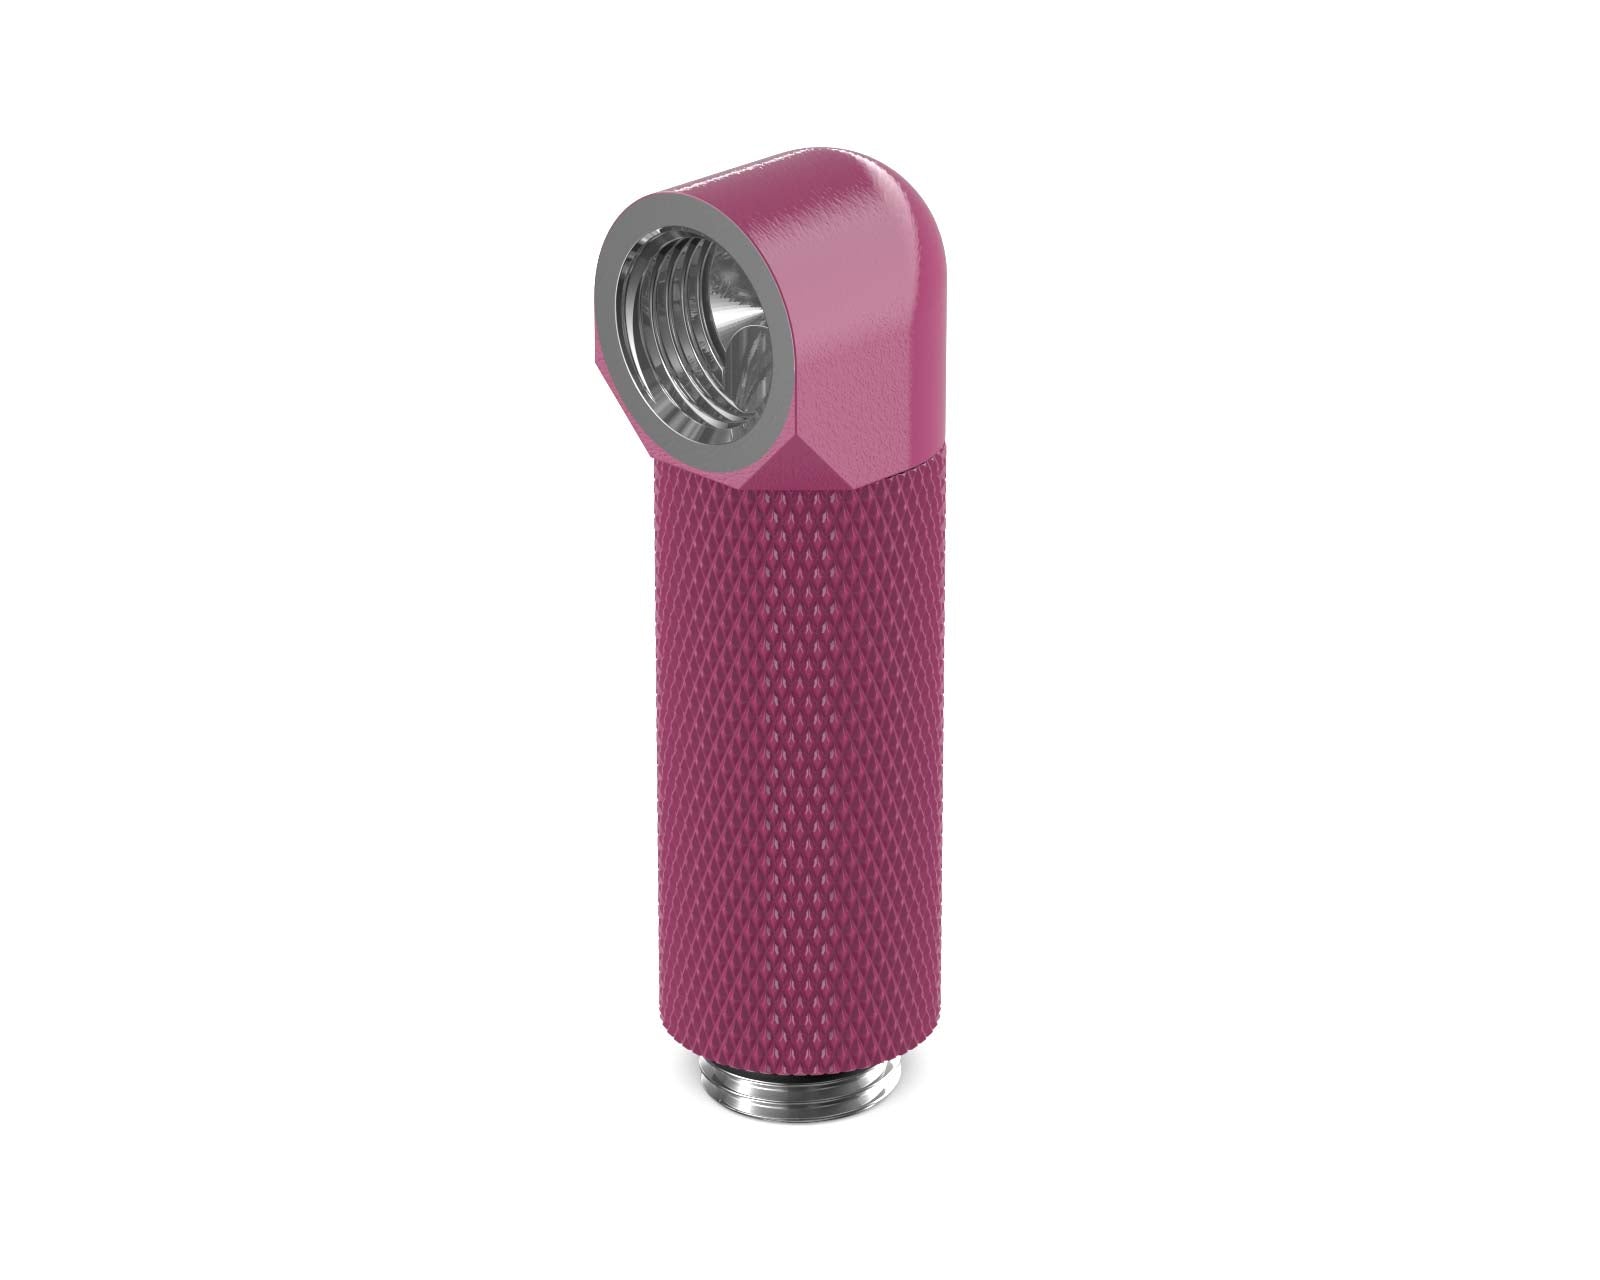 PrimoChill Male to Female G 1/4in. 90 Degree SX Rotary 40mm Extension Elbow Fitting - PrimoChill - KEEPING IT COOL Magenta